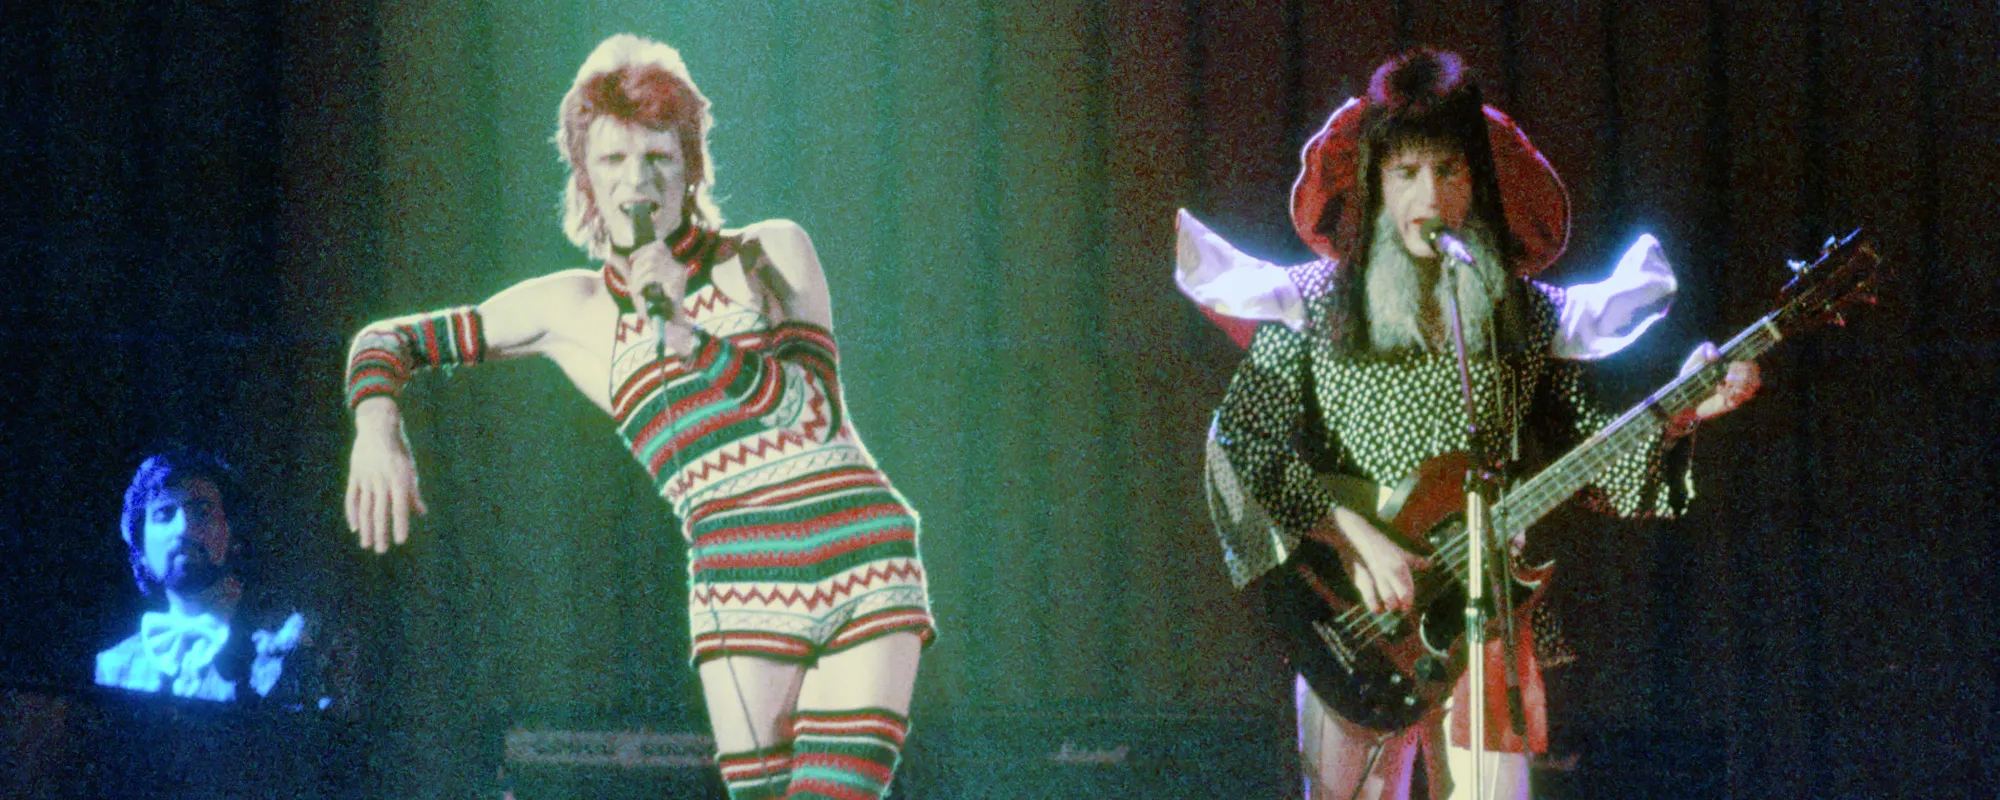 Remember When: David Bowie Debuted His Alter Ego Ziggy Stardust